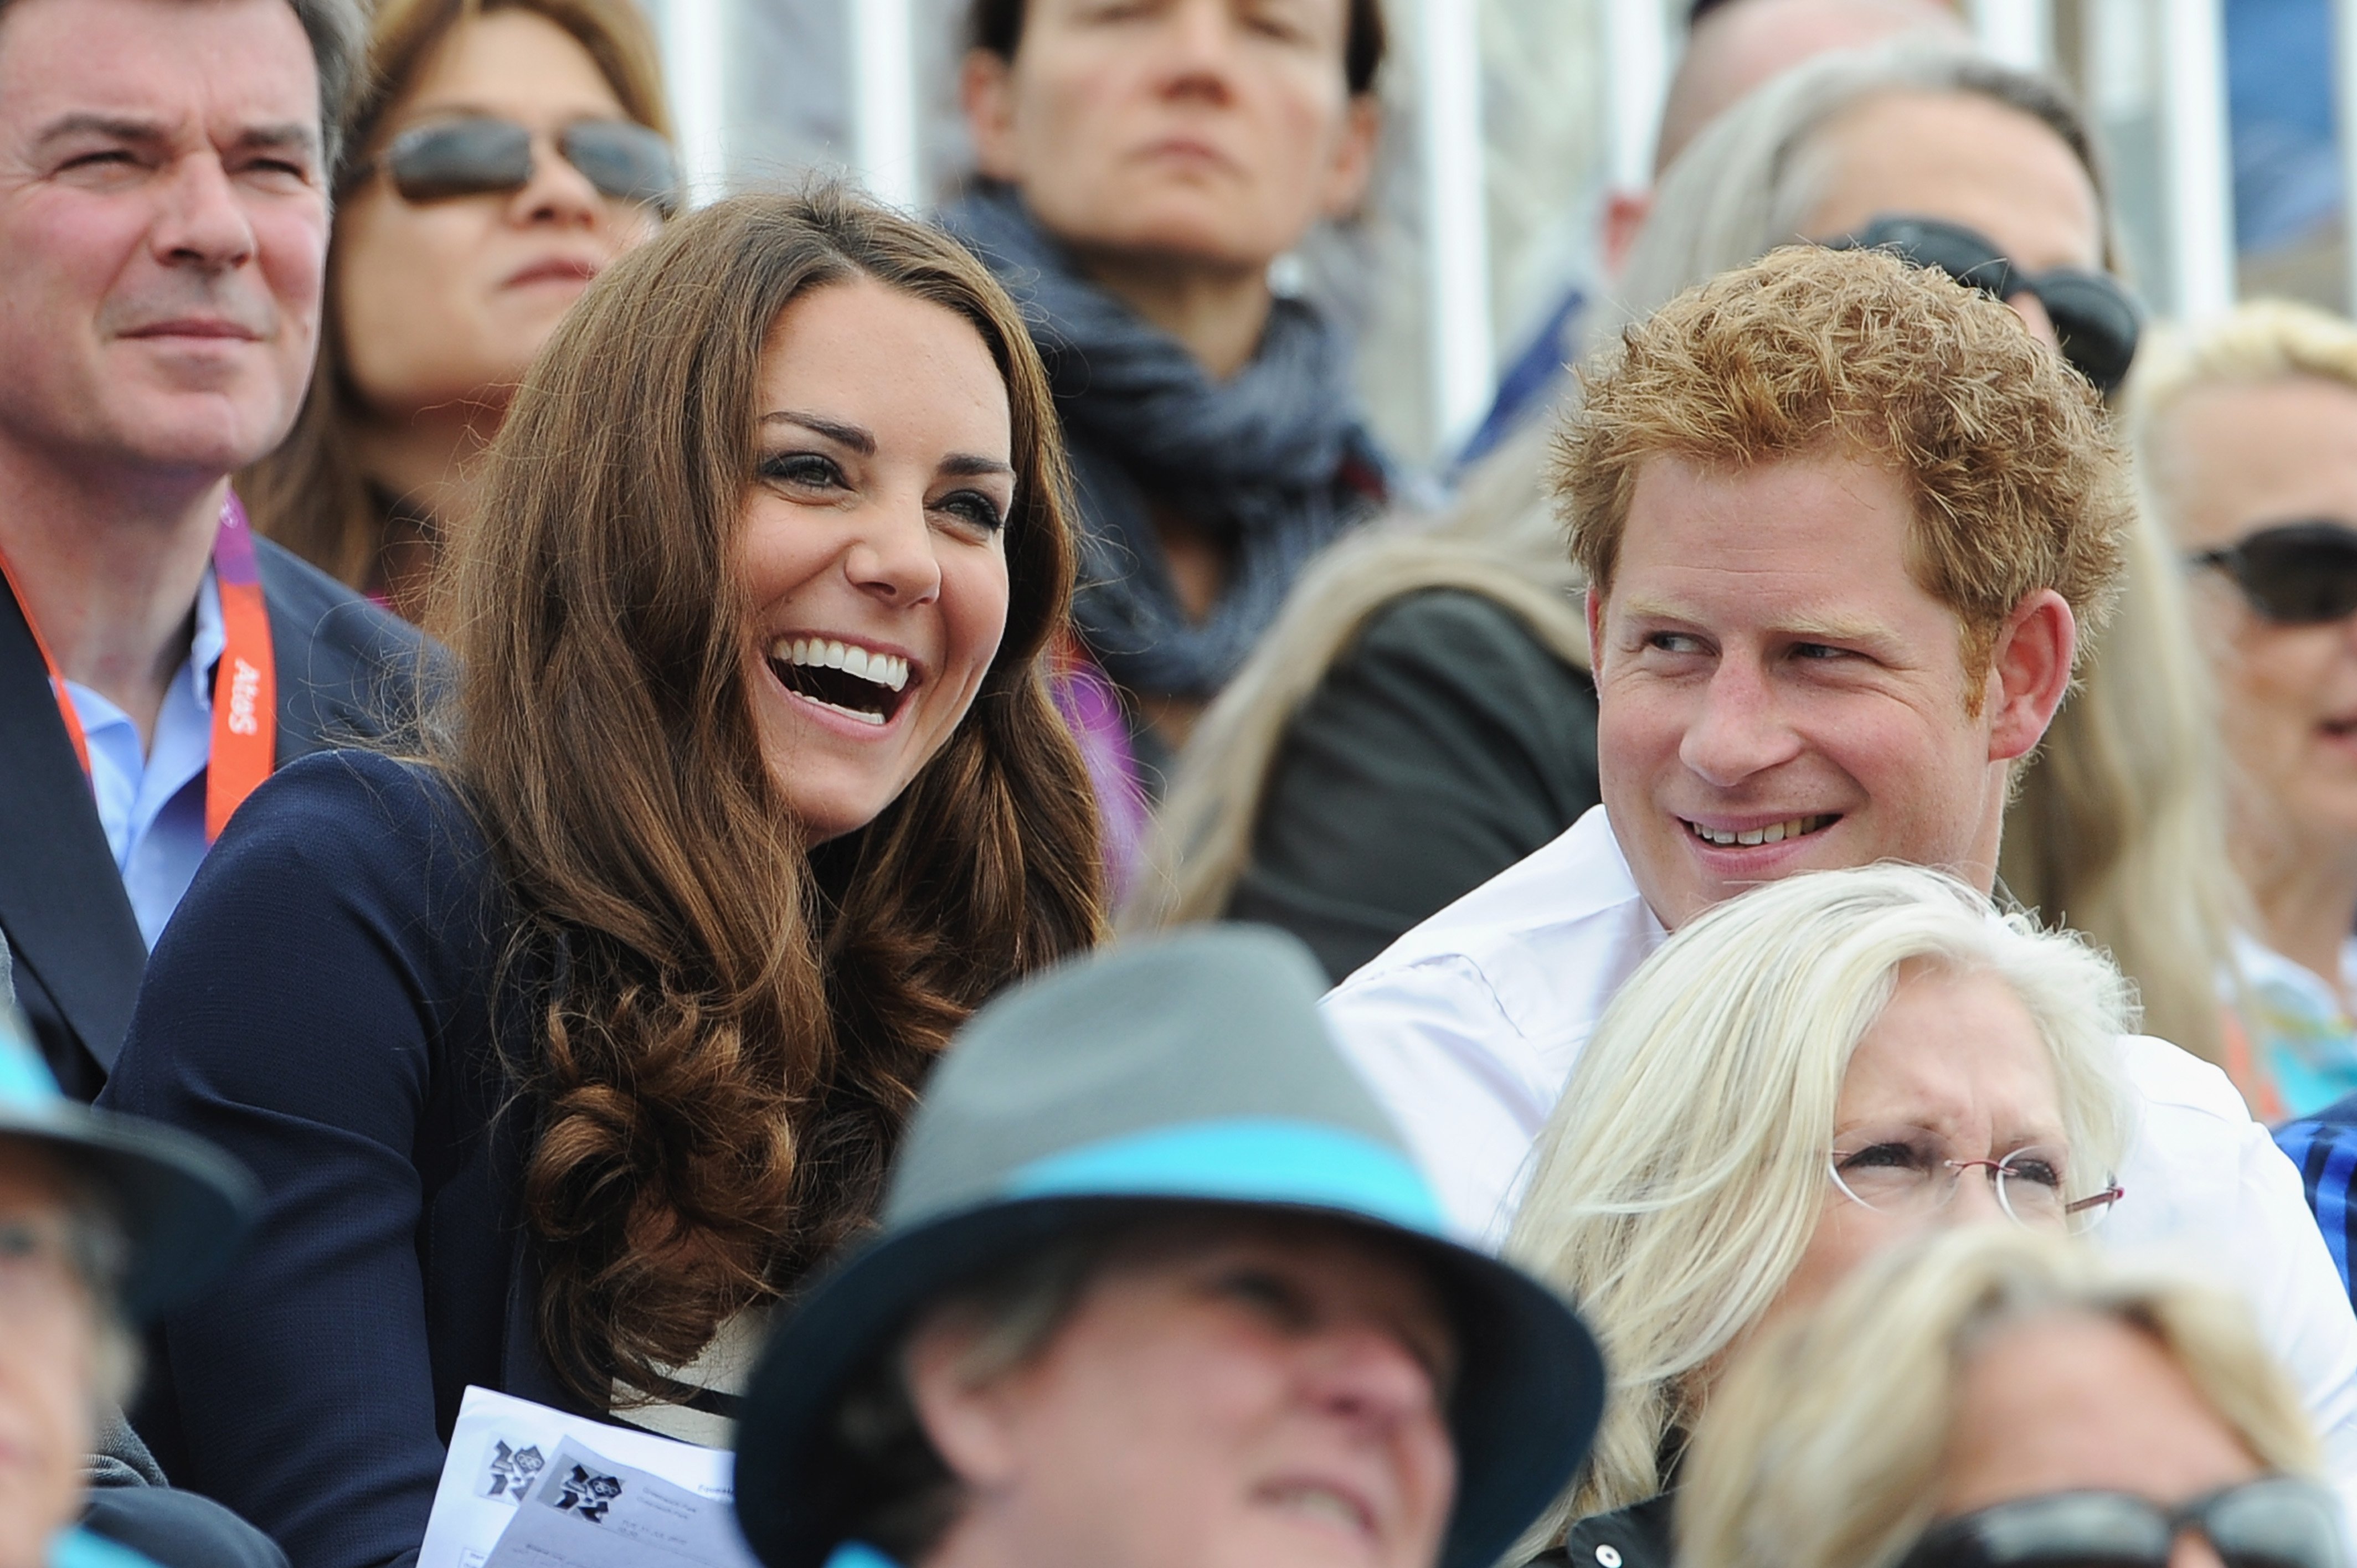 Kate Middleton, Duchess of Cambridge and Prince Harry, Duke of Sussex during the Show Jumping Eventing Equestrian on Day 4 of the London 2012 Olympic Games at Greenwich Park on July 31, 2012 in London, England. | Source: Getty Images